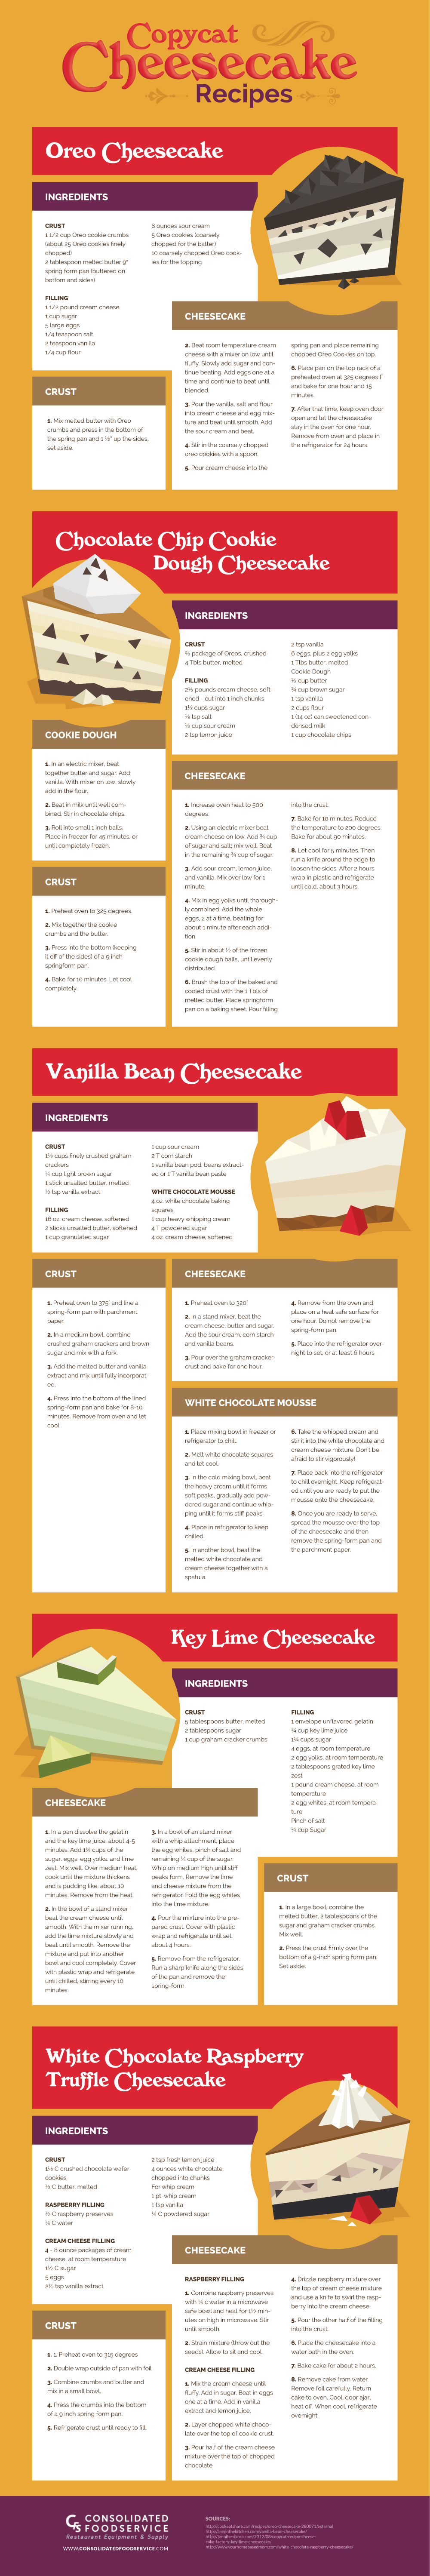 Cheesecake Factory Copycat Recipes Infographic